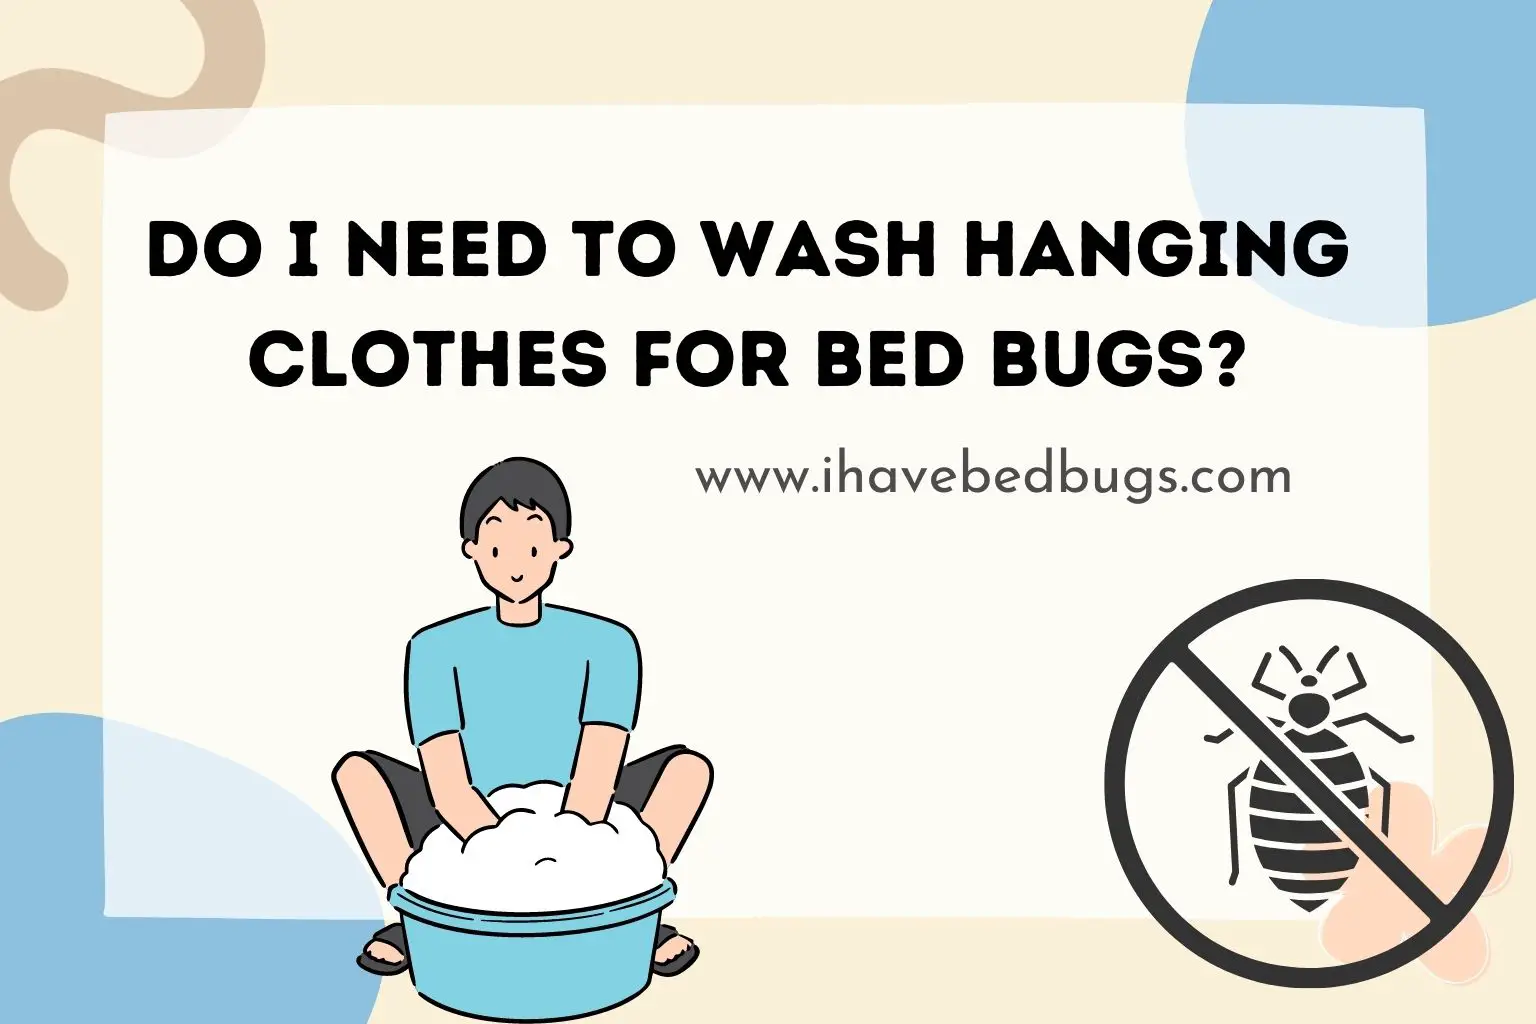 Do I need to wash hanging clothes for bed bugs